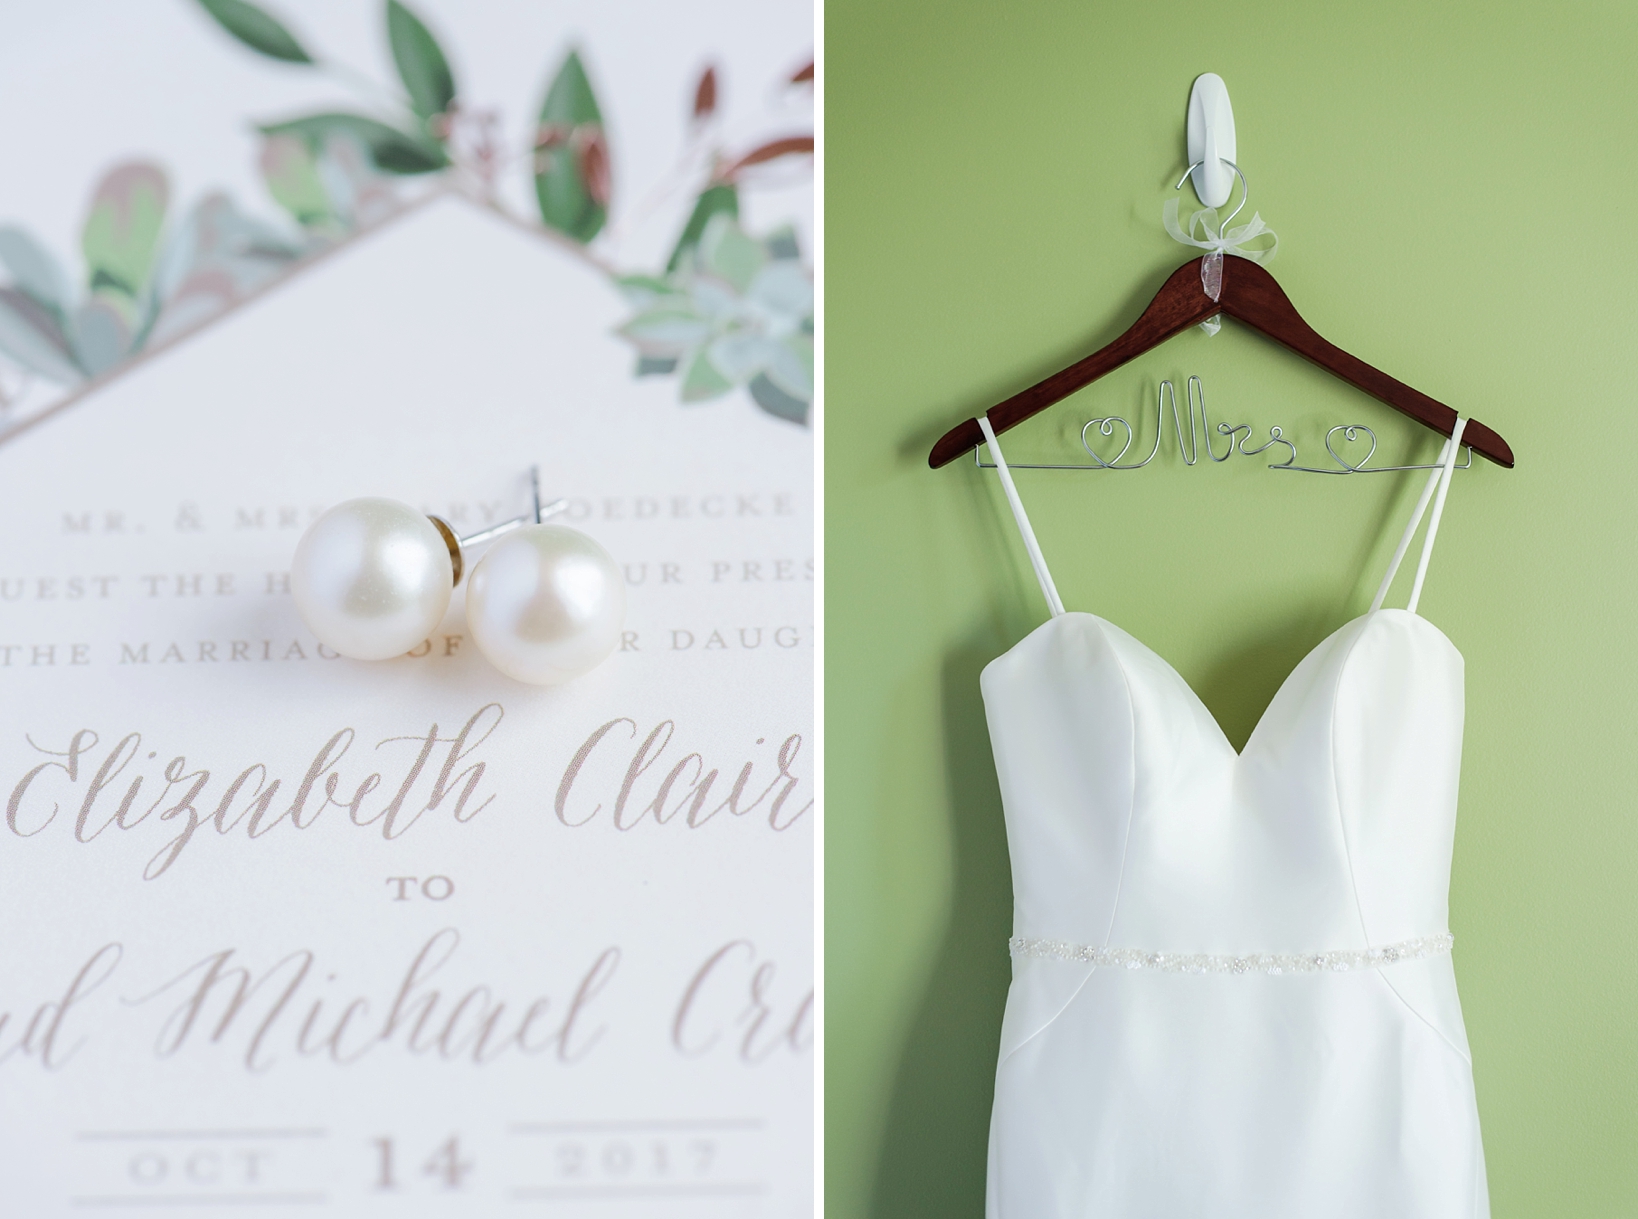 Pearl earrings atop a wedding invitation and the bridal gown hanging on custom hanger.